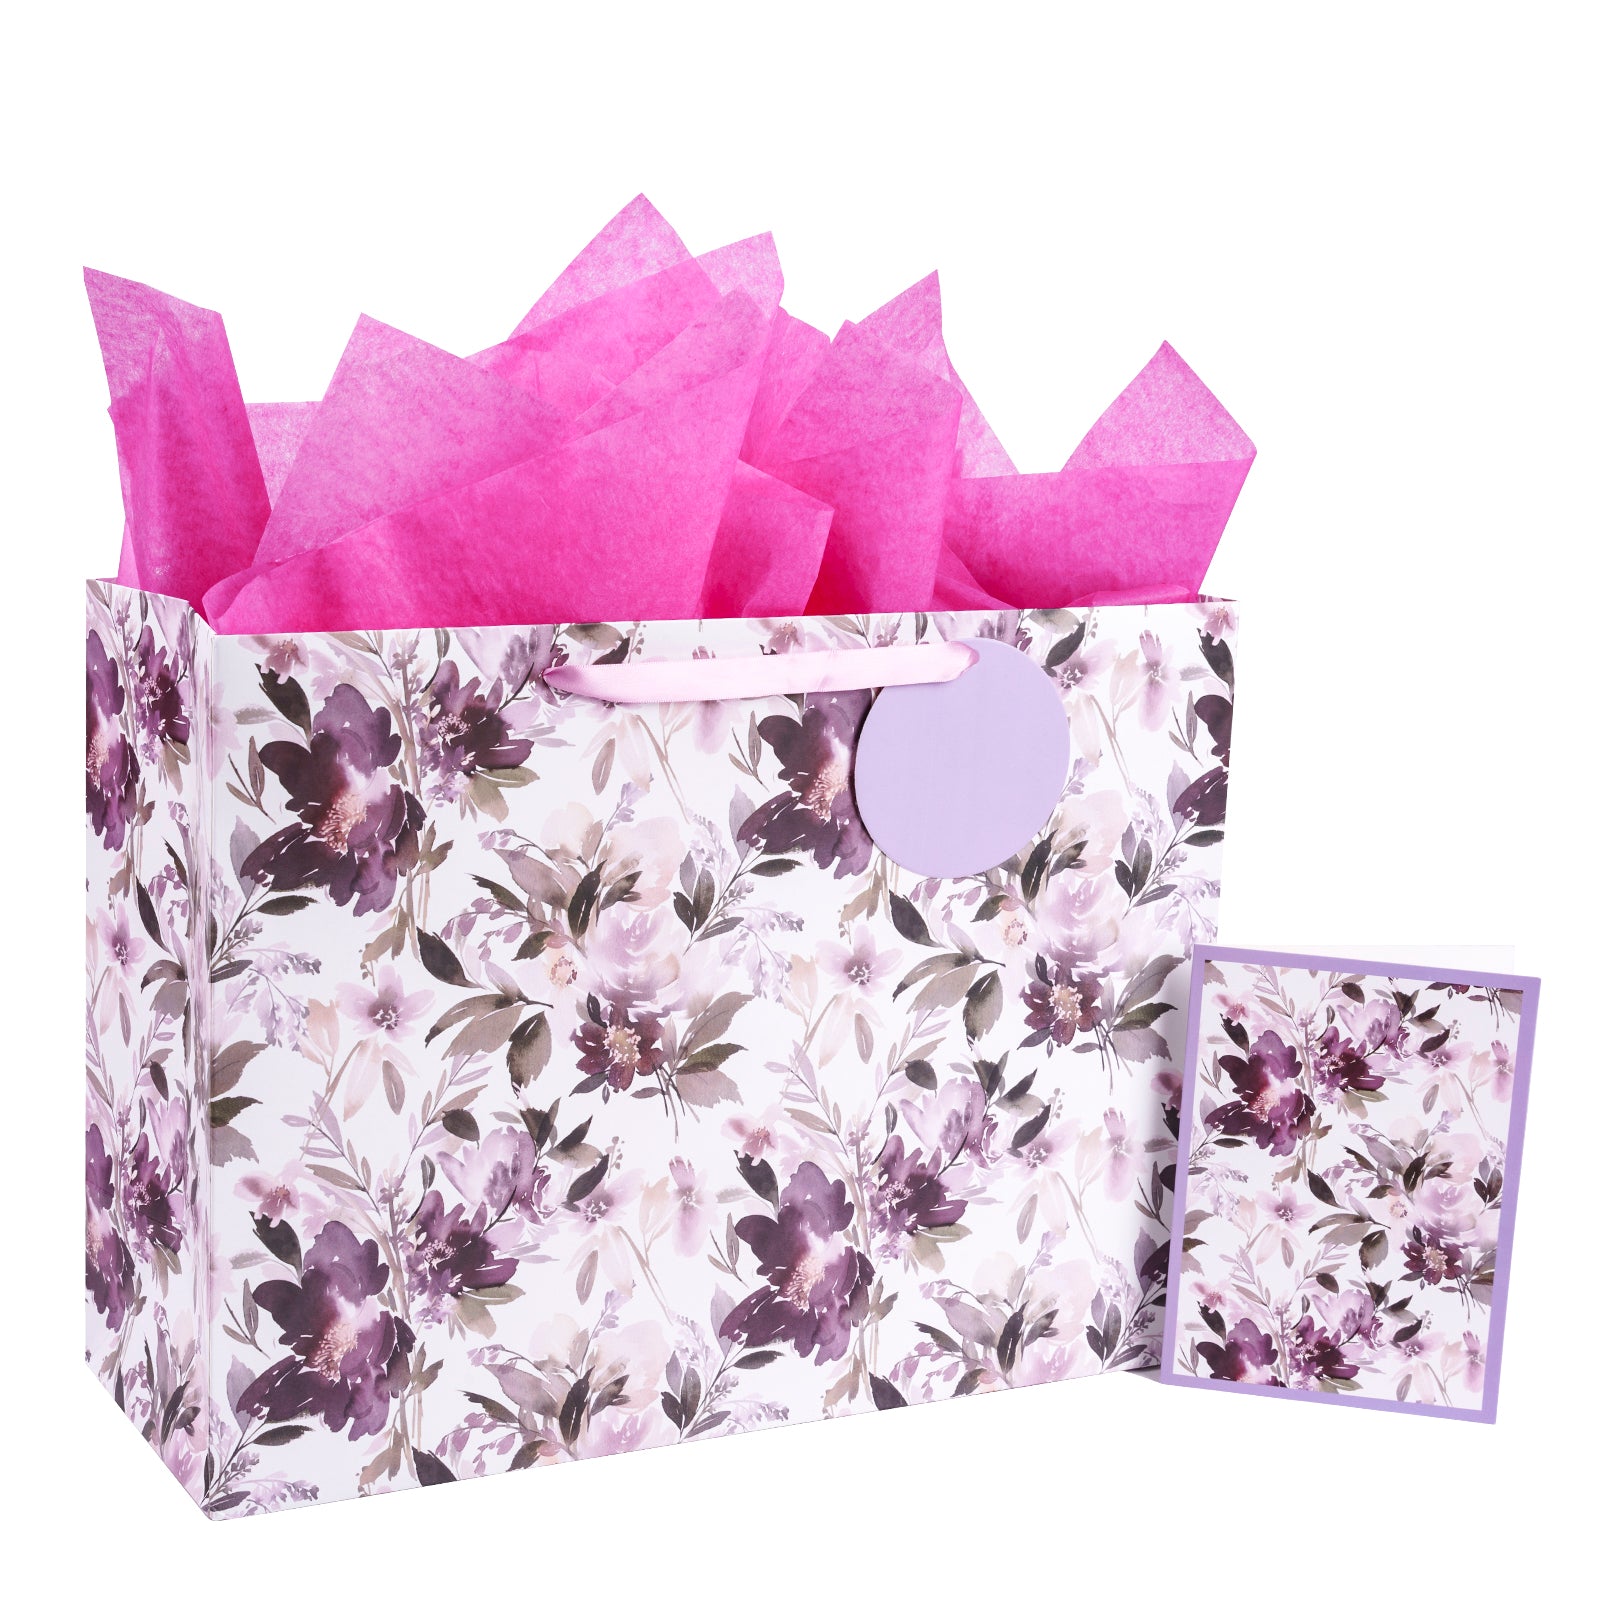 Bobobag 4 Pack 16.5 Extra Large Gift Bags with Tissue Paper for Mother's  Day, Birthday Presents (gold polka dot)